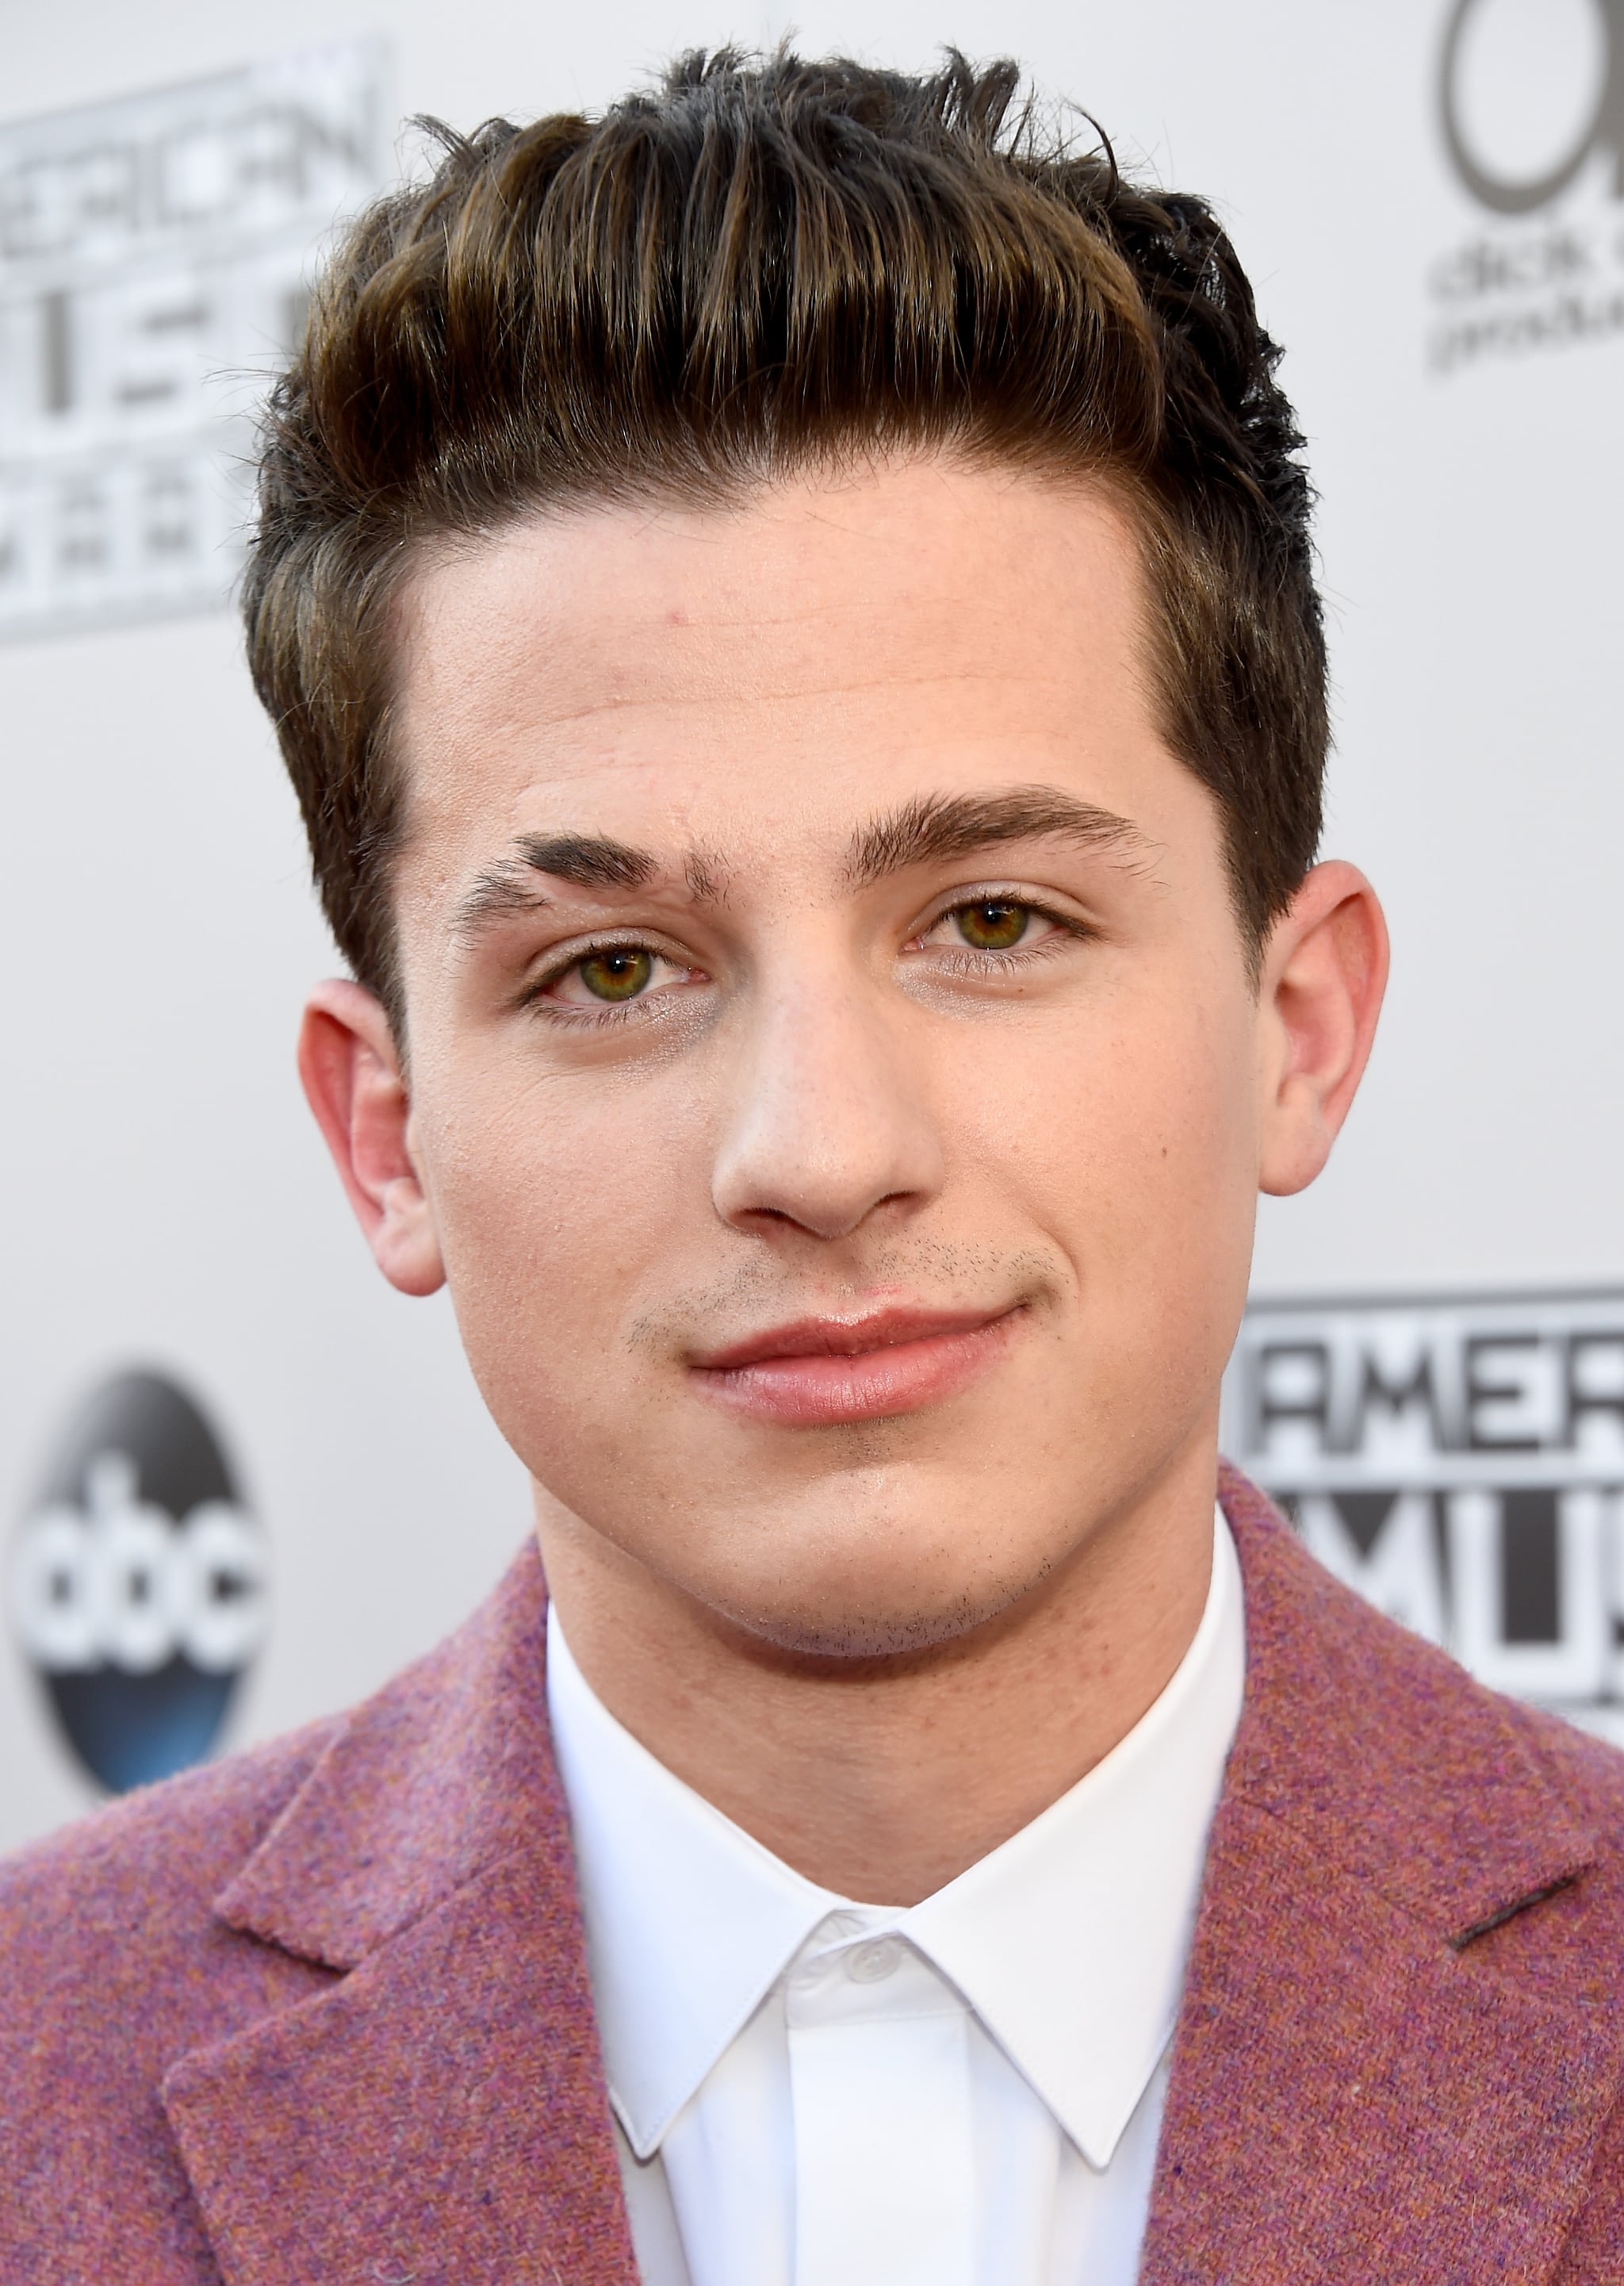 Charlie puth hairstyle (2018) - YouTube